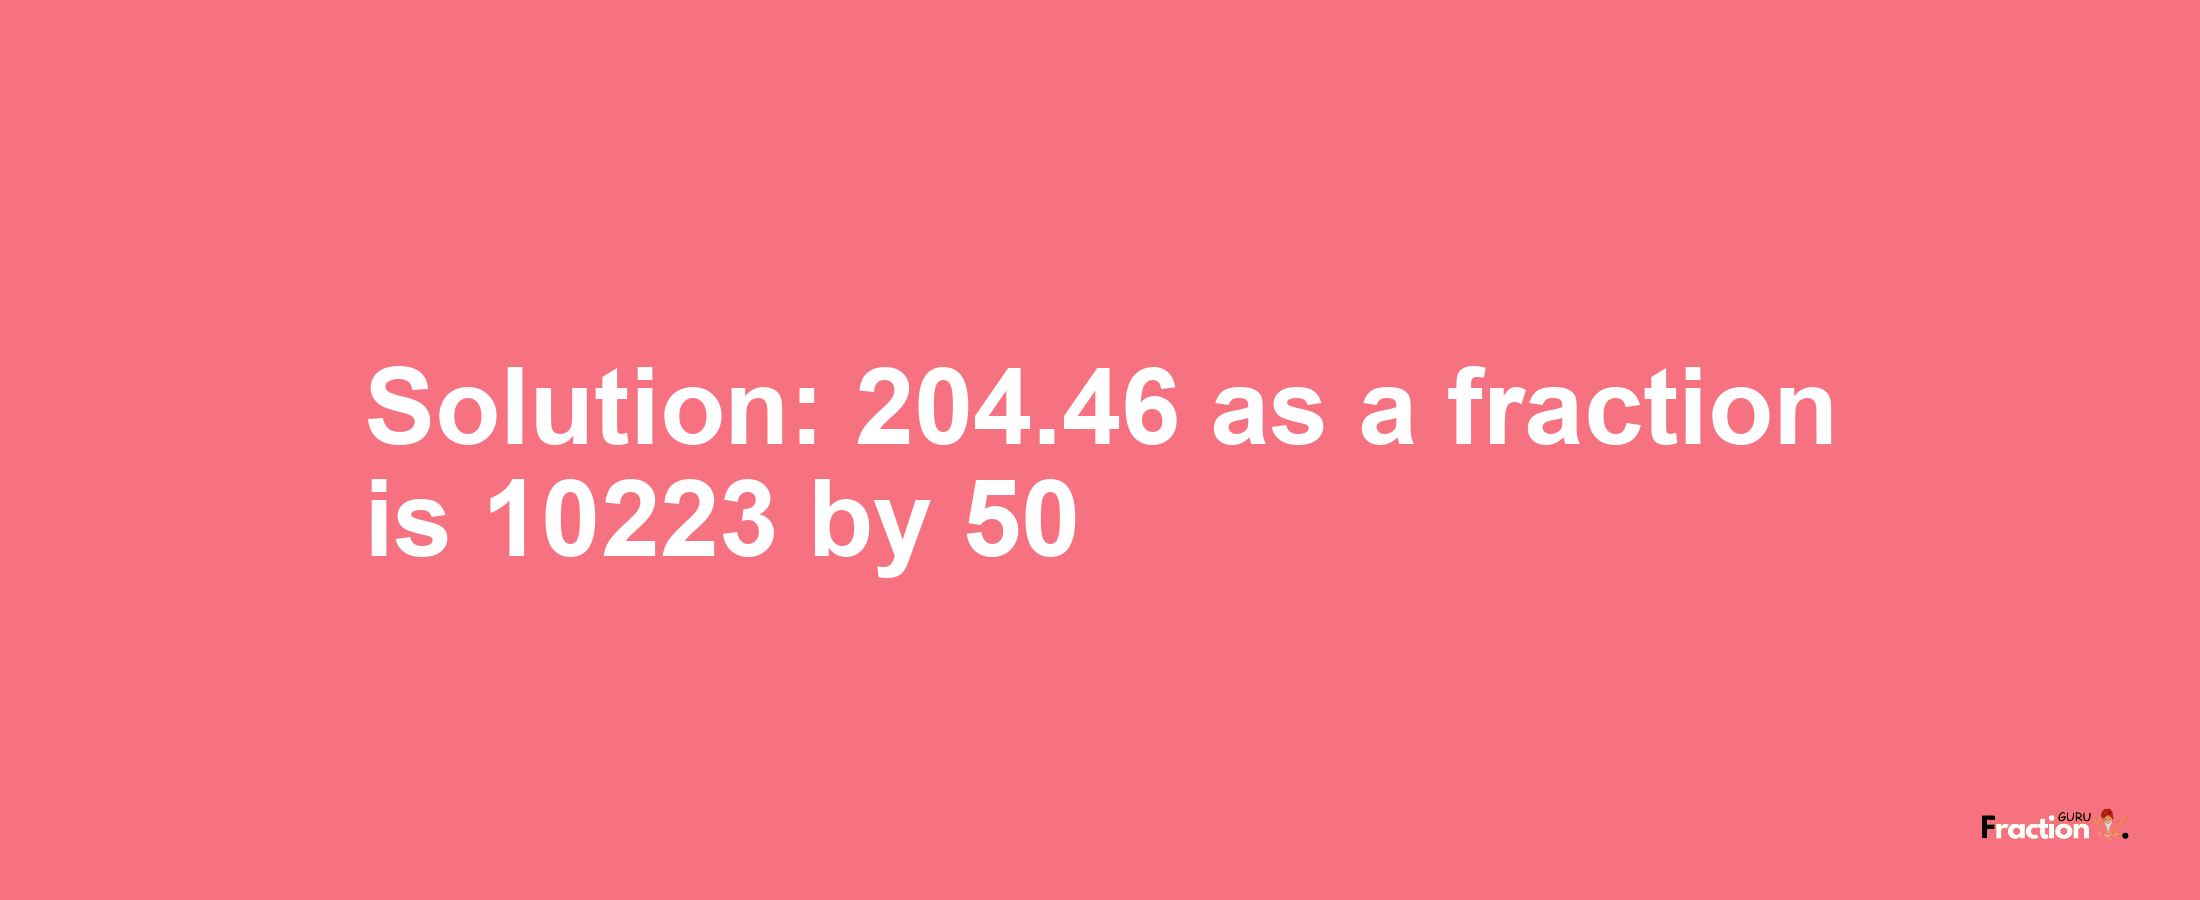 Solution:204.46 as a fraction is 10223/50